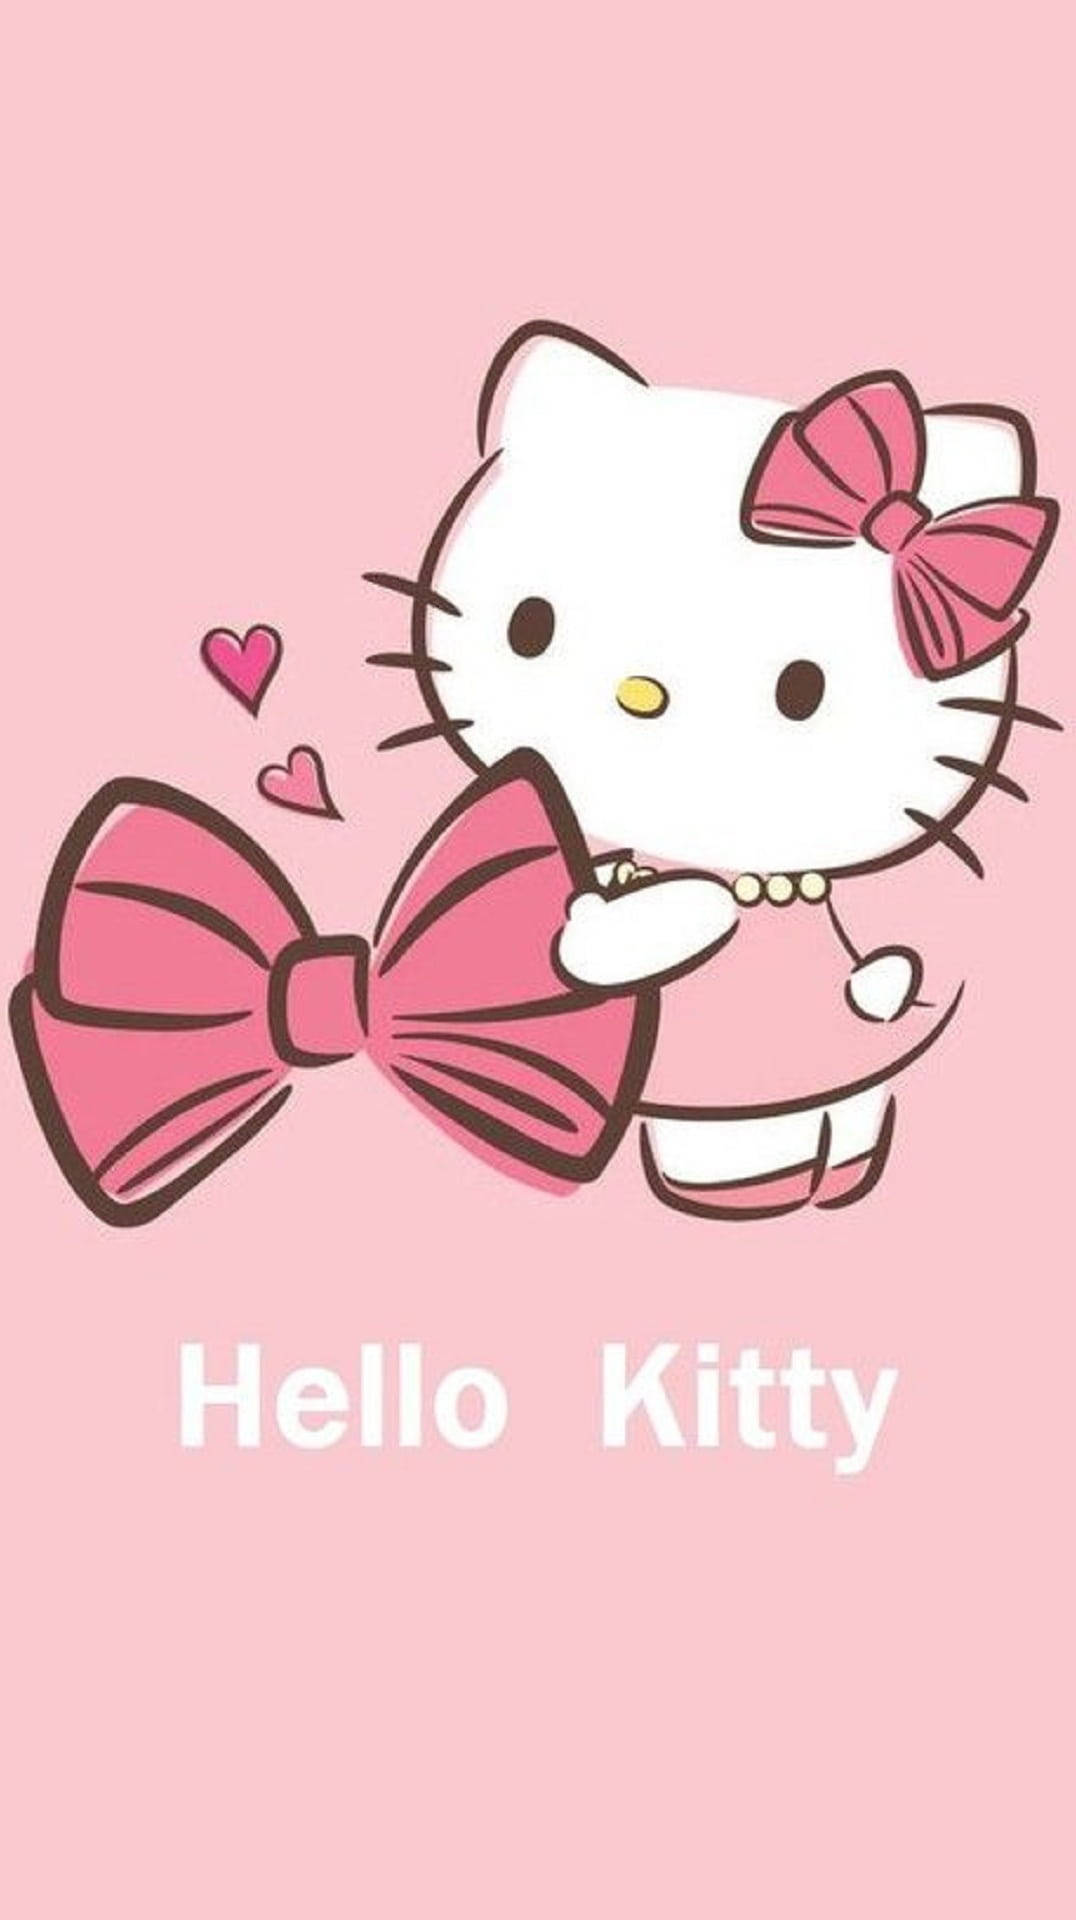 Download Pink Hello Kitty Holding A Bow Wallpaper | Wallpapers.com